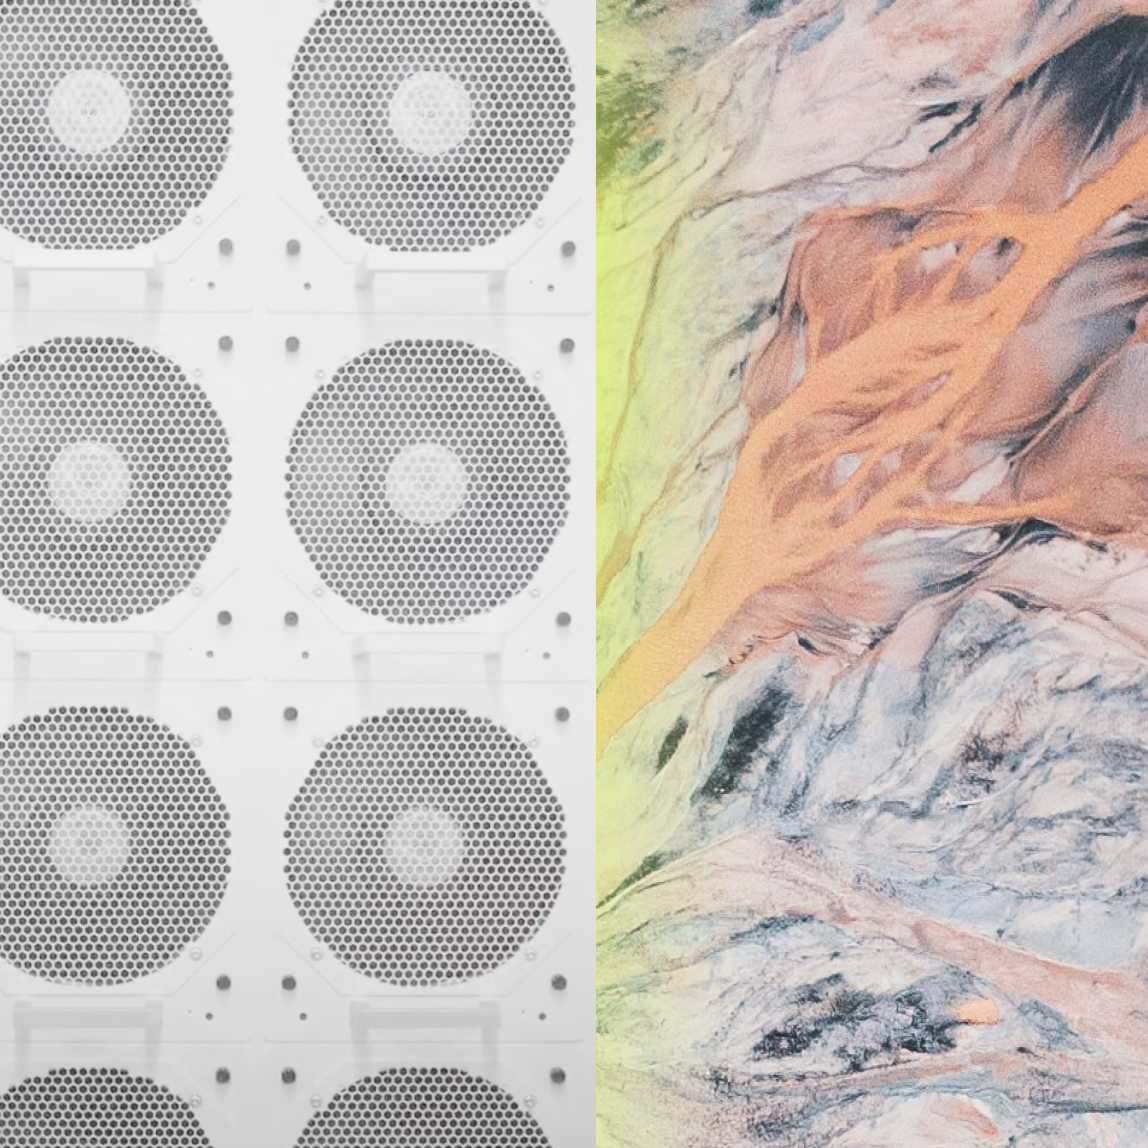 Side-by-side images: on the left, a regular pattern of four circular white ventilation grills on a metal surface; on the right, an abstract painting with swirling colors of orange, blue, and white.